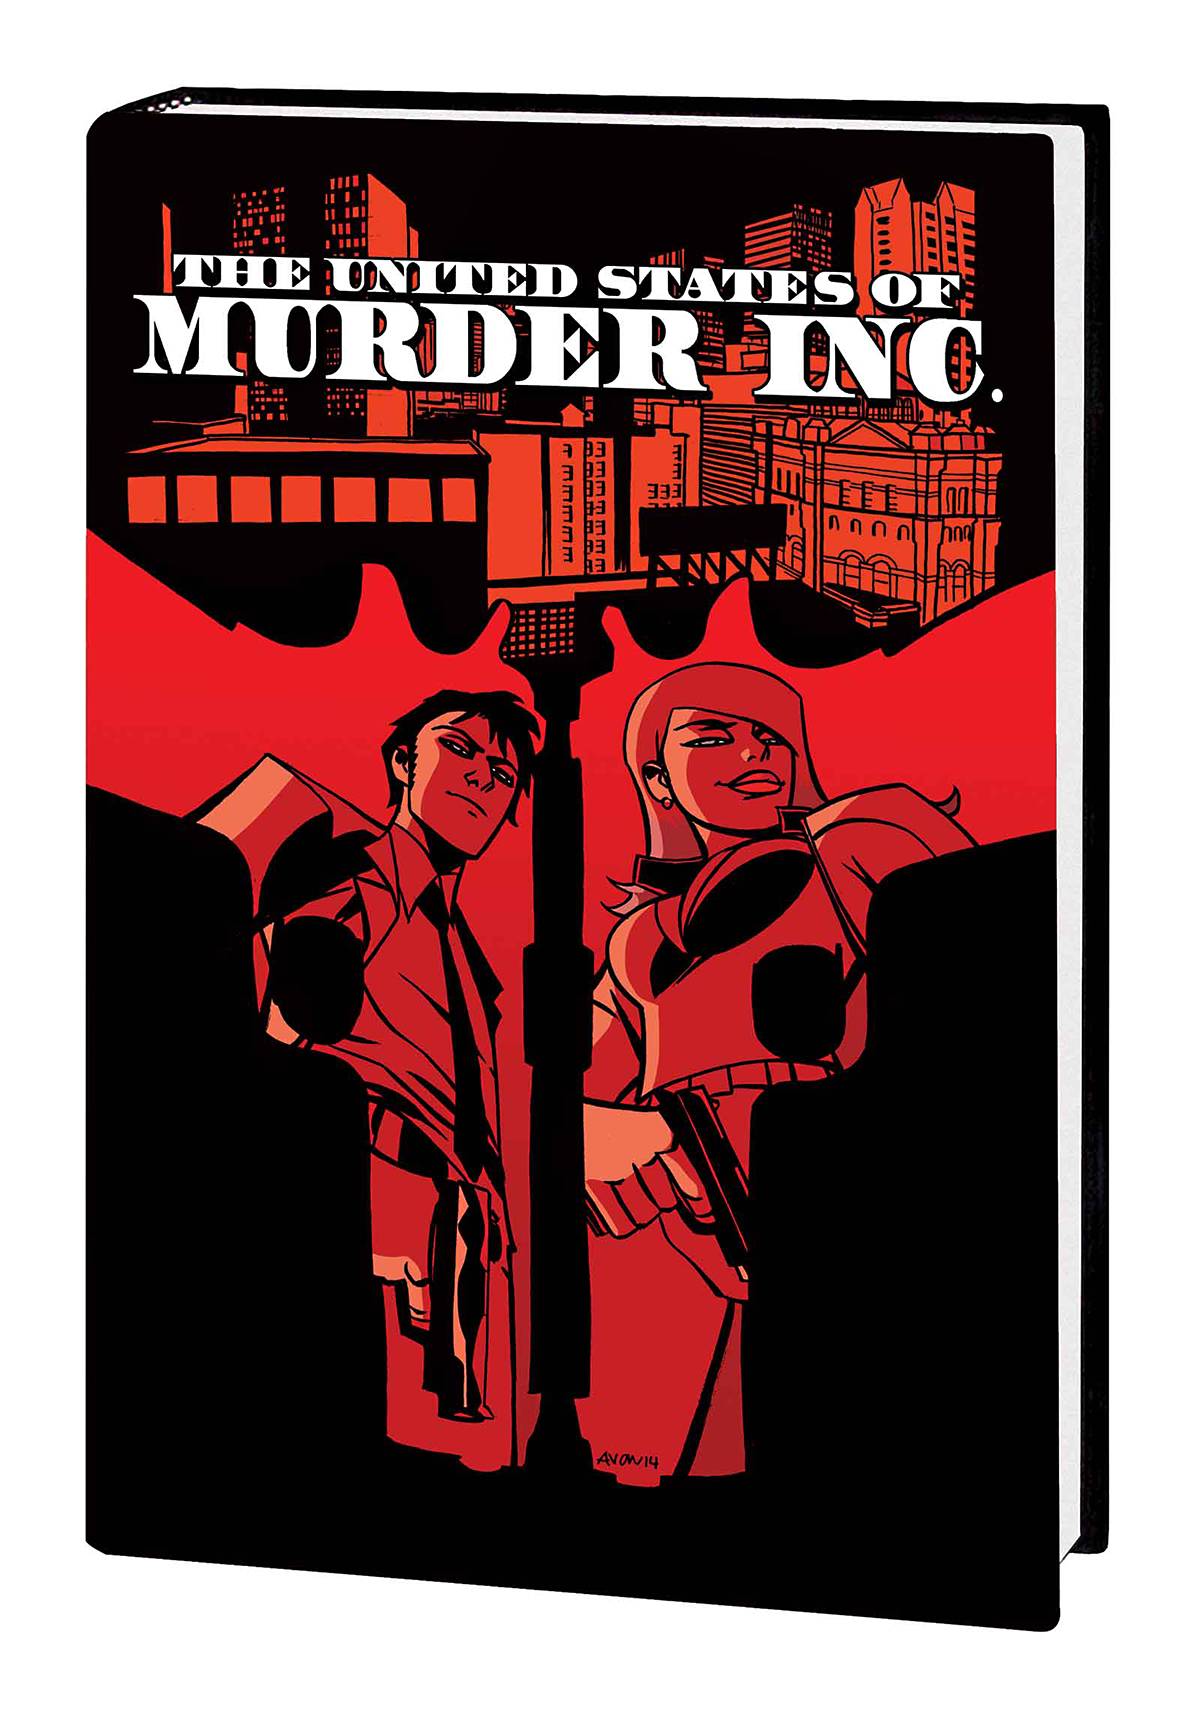 United States of Murder Inc Hardcover Volume 1 Truth